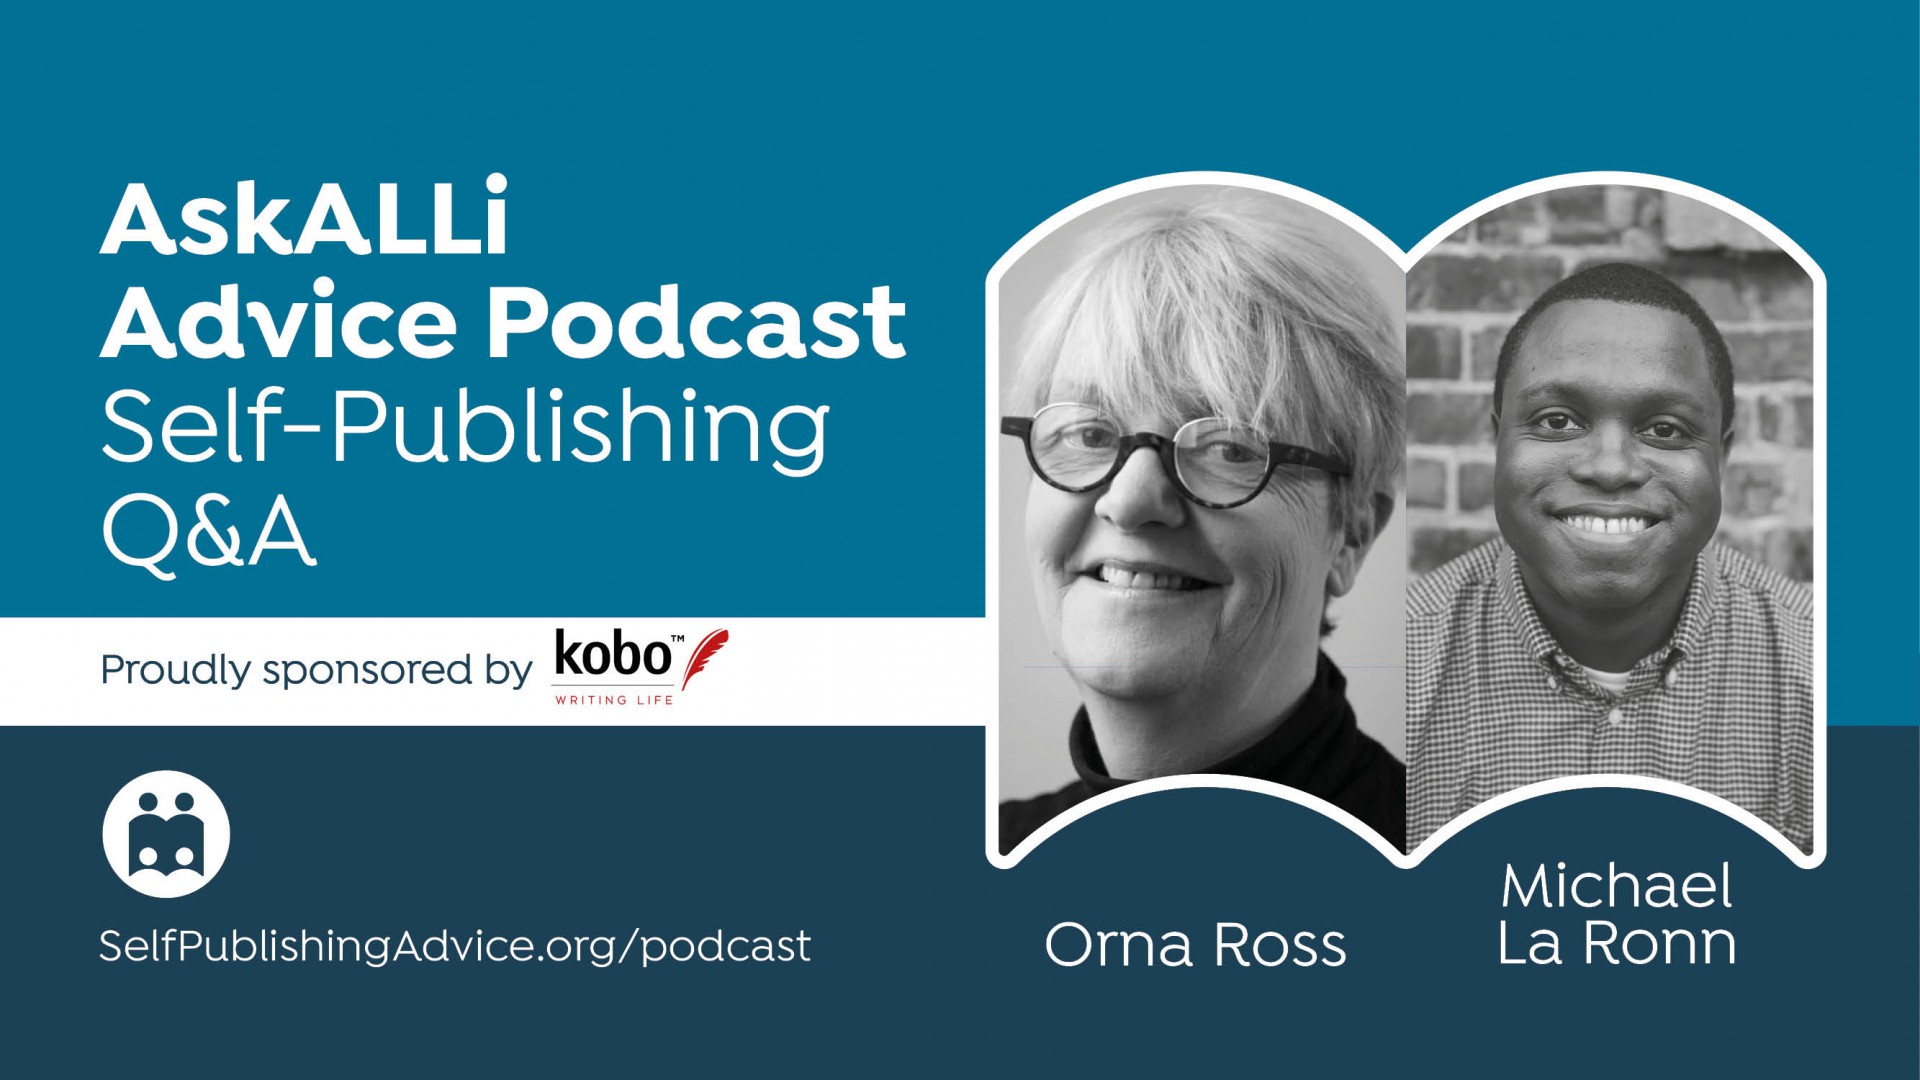 What’s The Best Way To Keep In Touch With My Readers? Other Questions Answered By Orna Ross And Michael La Ronn In Our Member Q&A Podcast